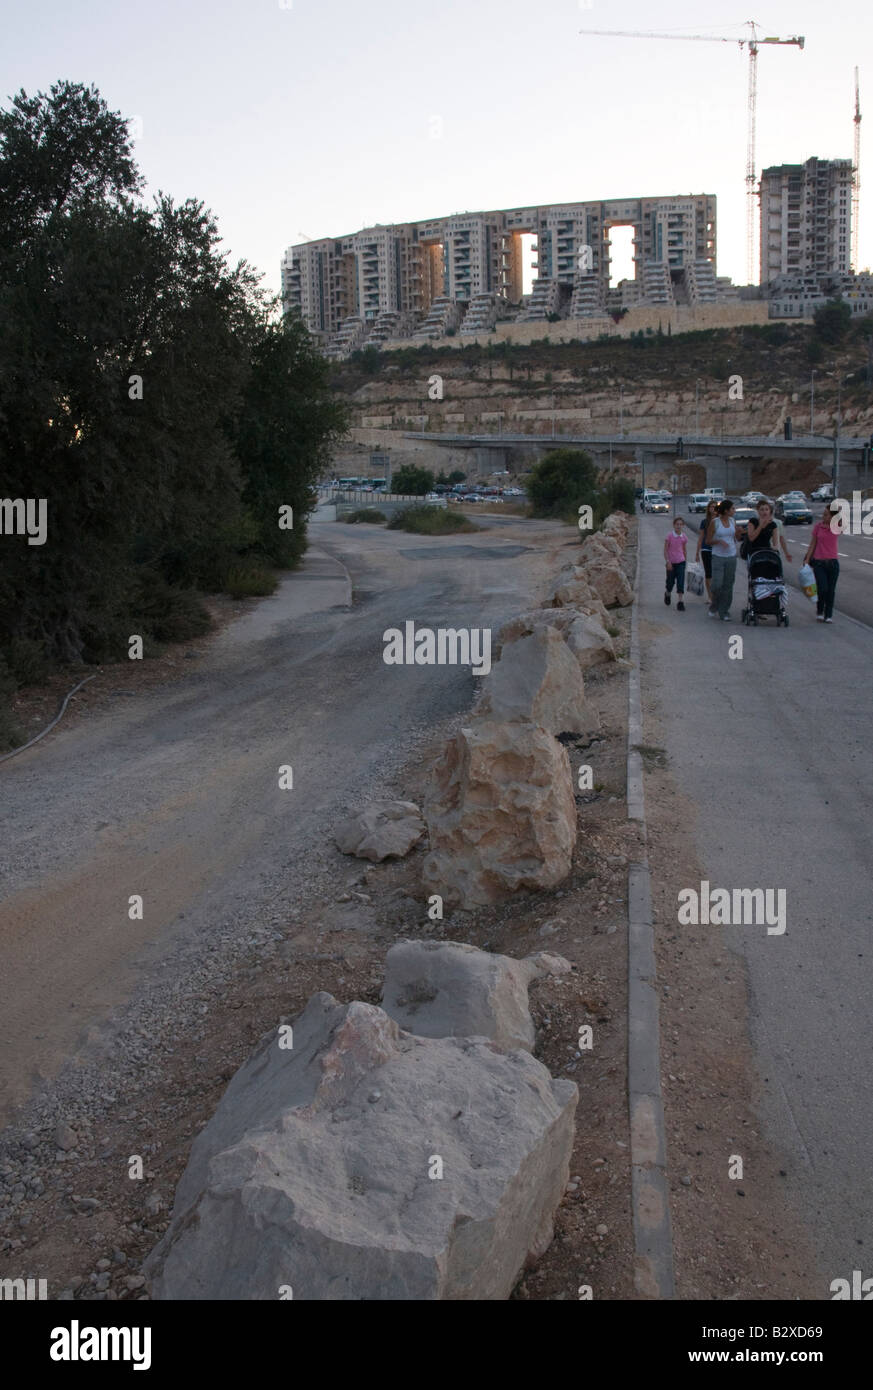 Israel Jerusalem Holyland housing project view from afar Stock Photo